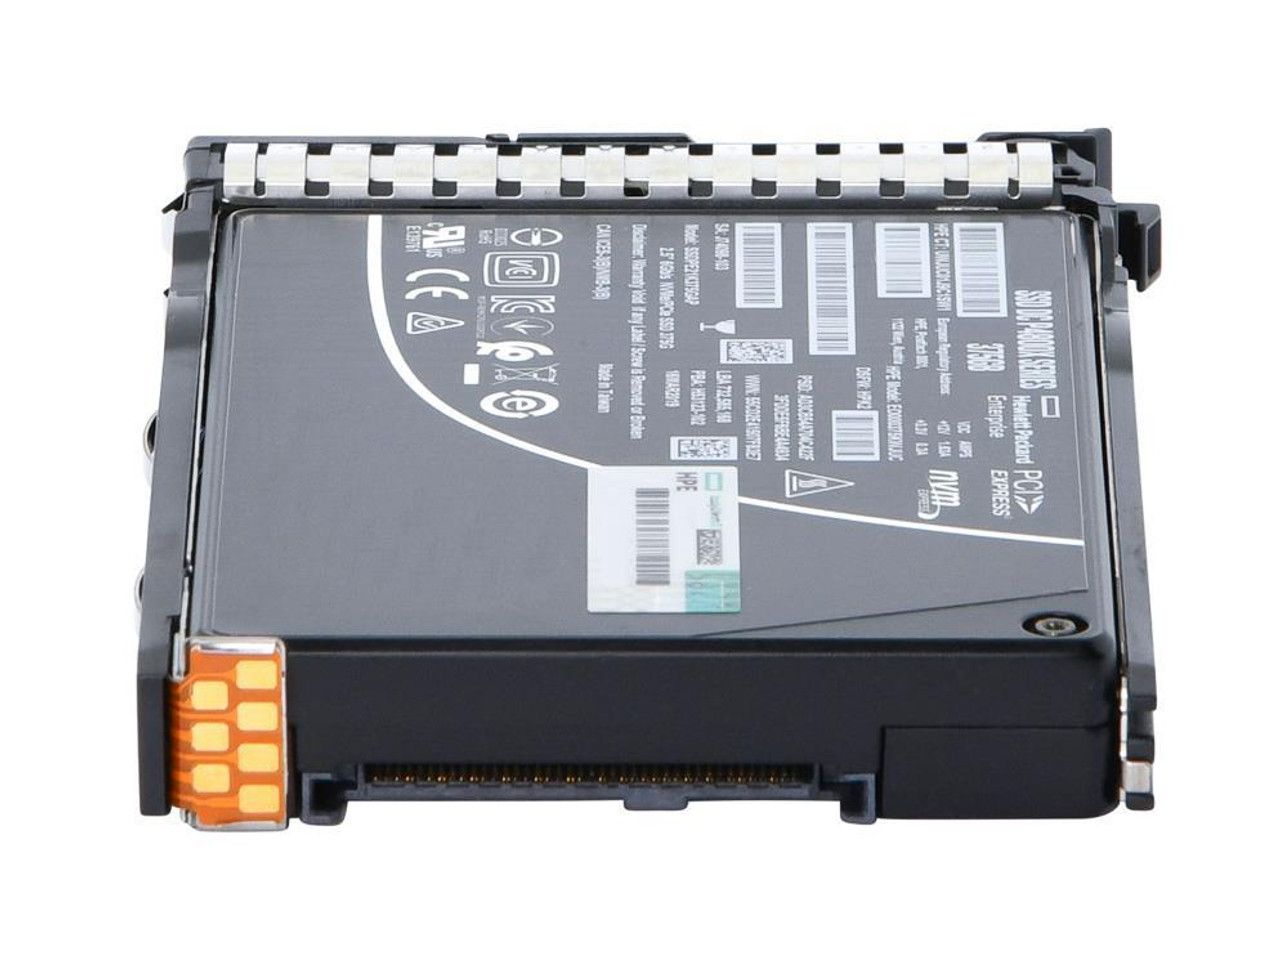 878014-H21 HPE 375GB PCI Express x4 NVMe Write Intensive 2.5-inch Internal Solid State Drive (SSD) with Smart Carrier